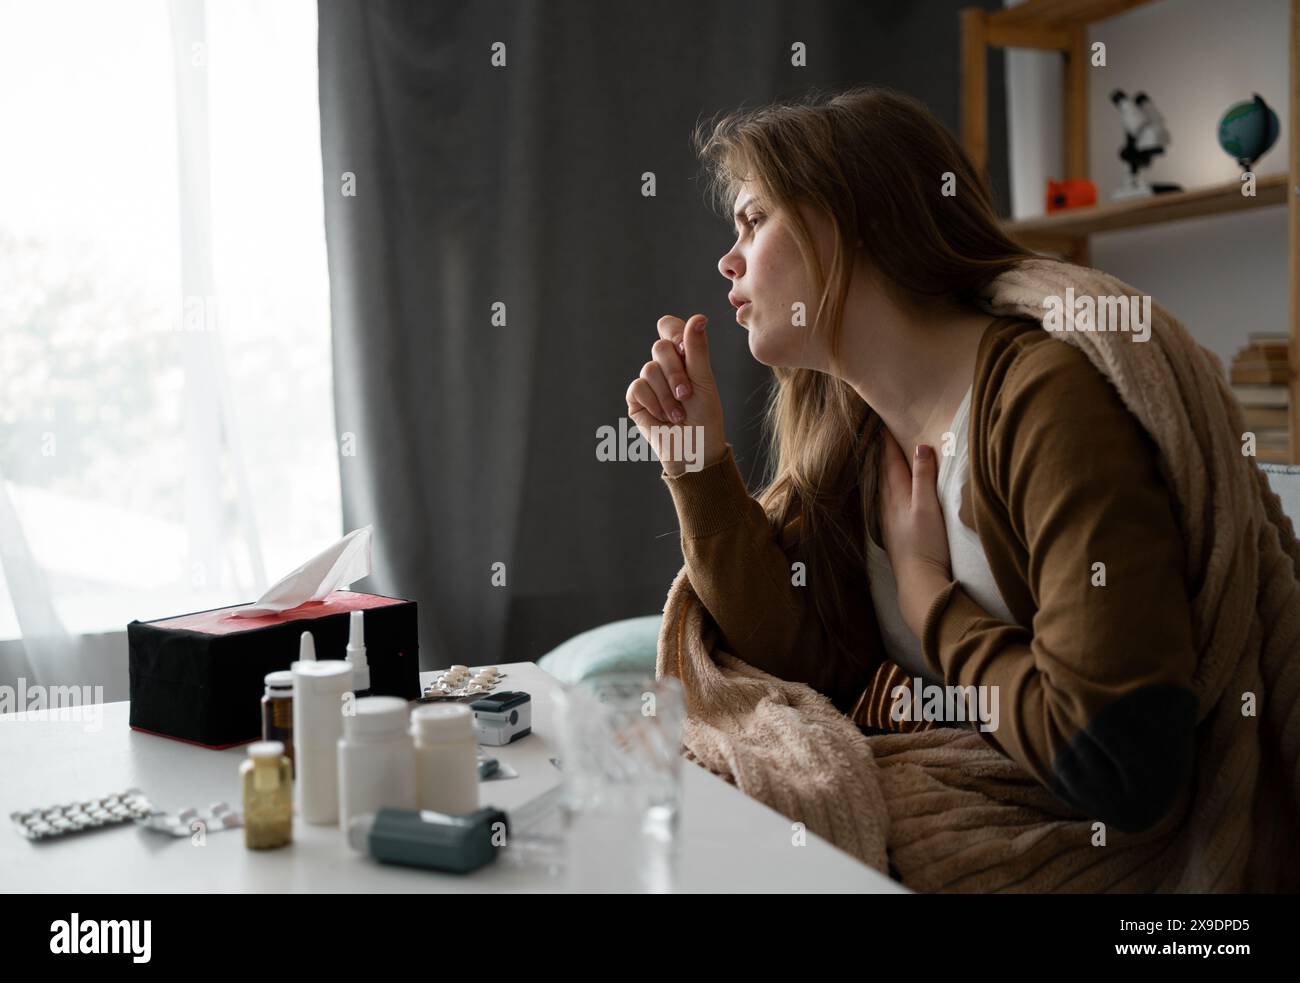 side view. young sick upset woman sitting on the sofa at home covered with a blanket coughing intensely, sick girl with flu symptoms. copy space. bann Stock Photo